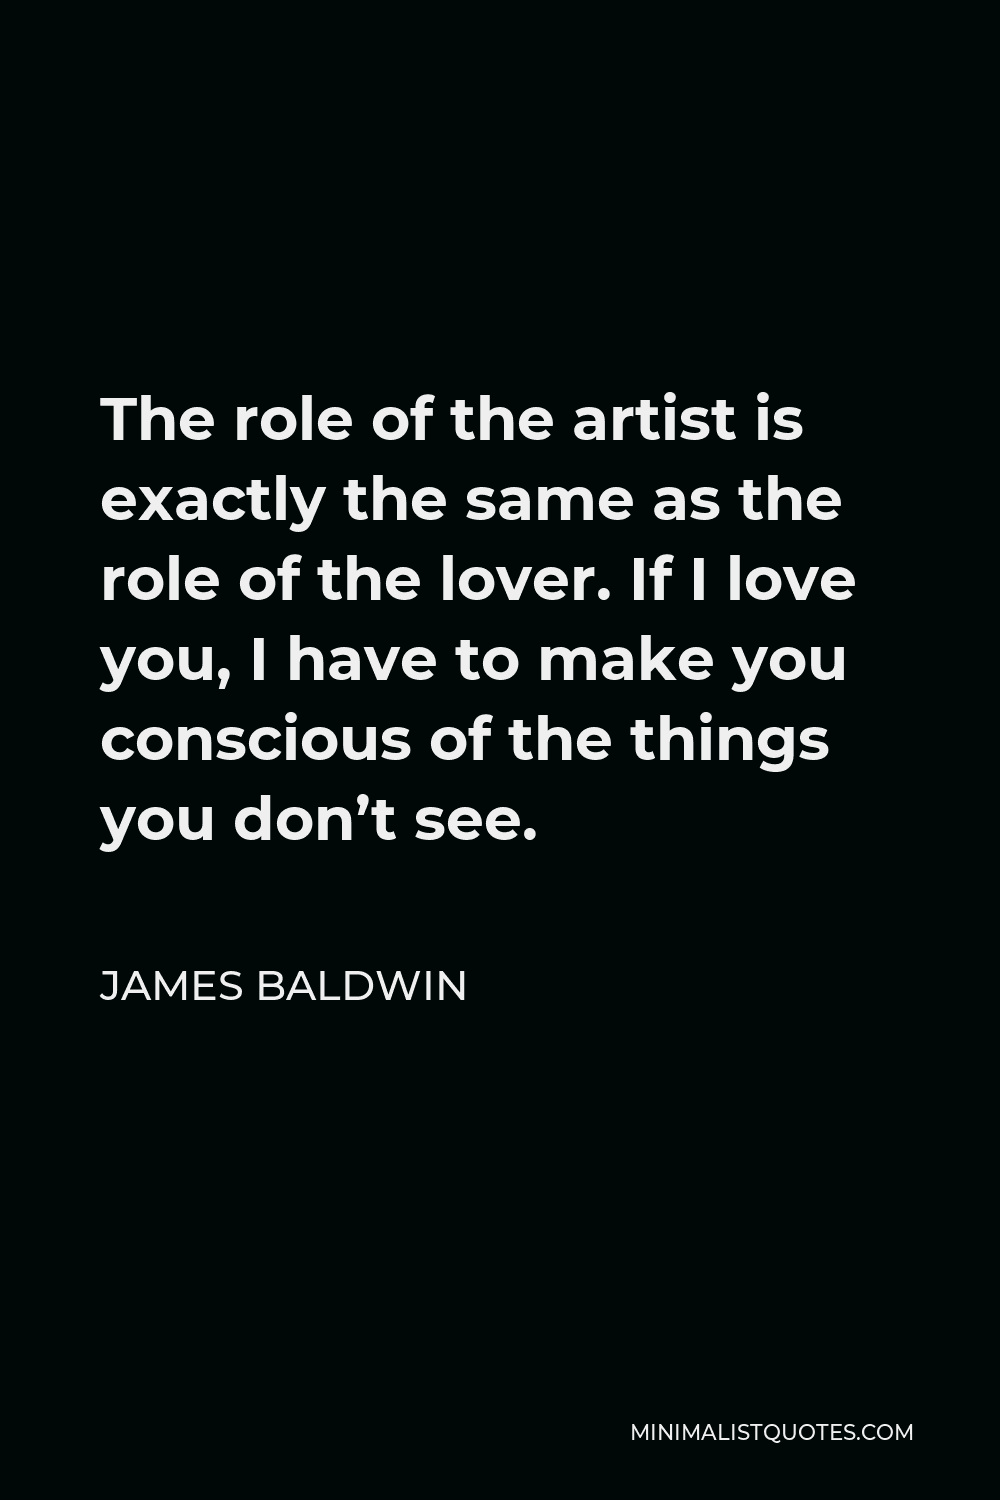 James Baldwin Quote - The role of the artist is exactly the same as the role of the lover. If I love you, I have to make you conscious of the things you don’t see.